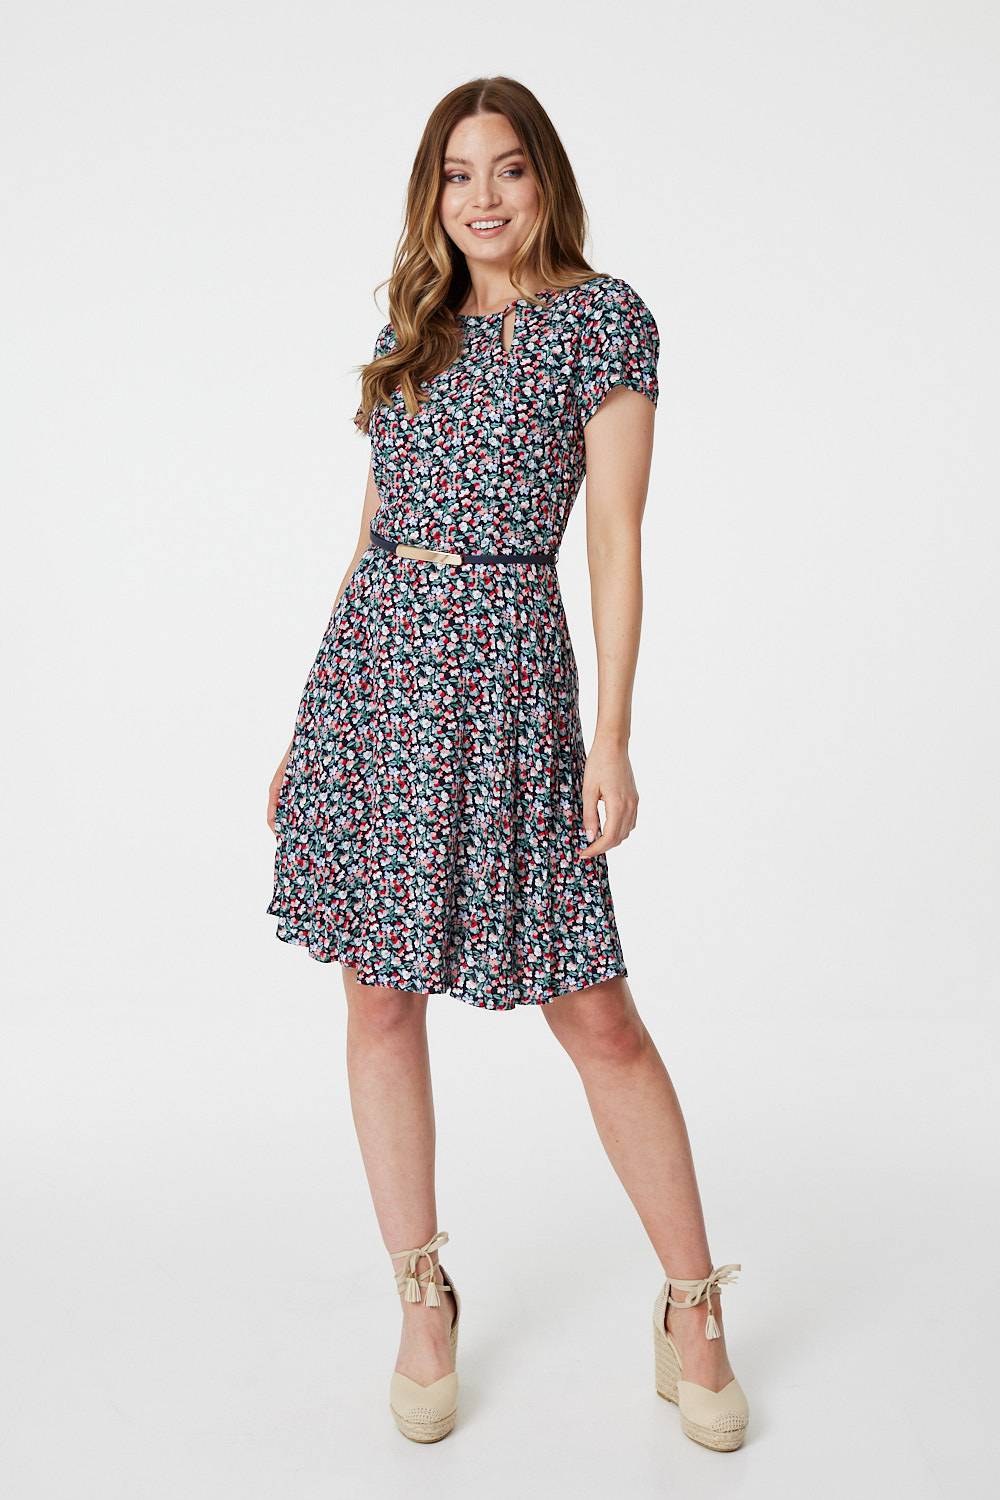 Navy | Ditsy Floral Cut Out Skater Dress